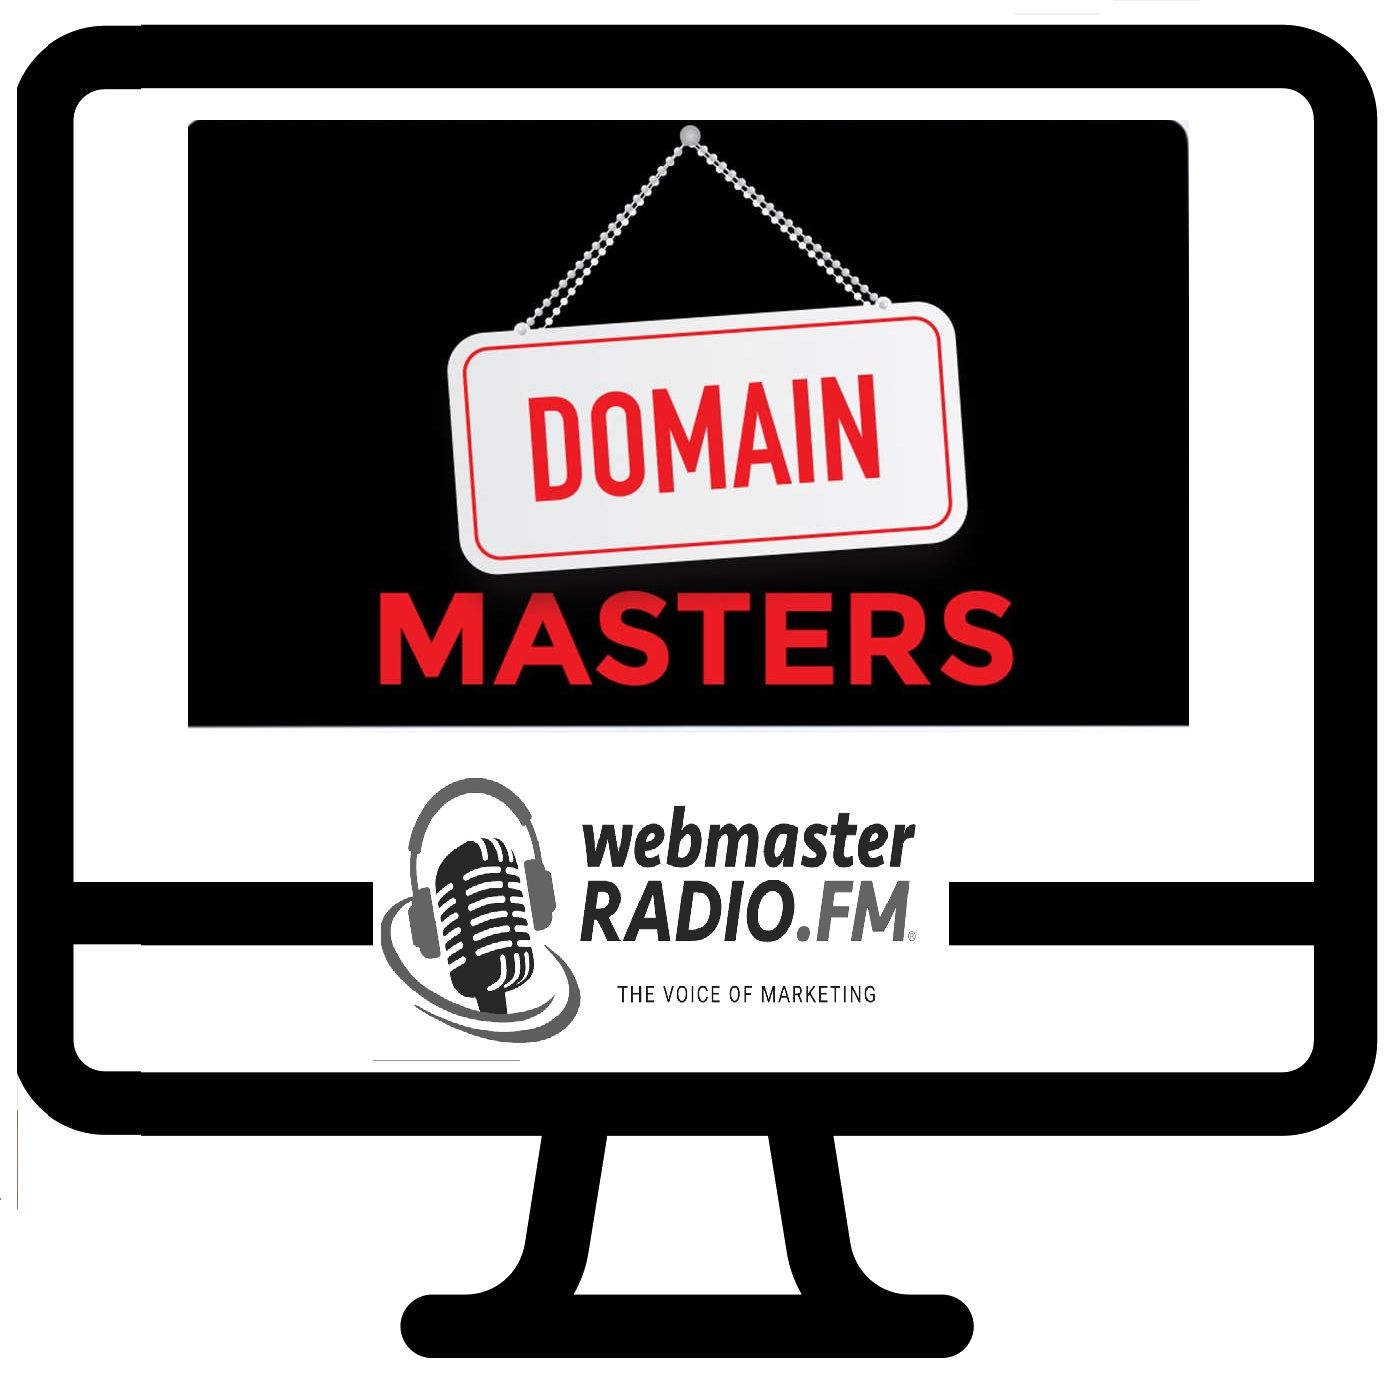 Monte Cahn Shares the Backstory of Domain Masters; Domain Auction News Making a Buzz